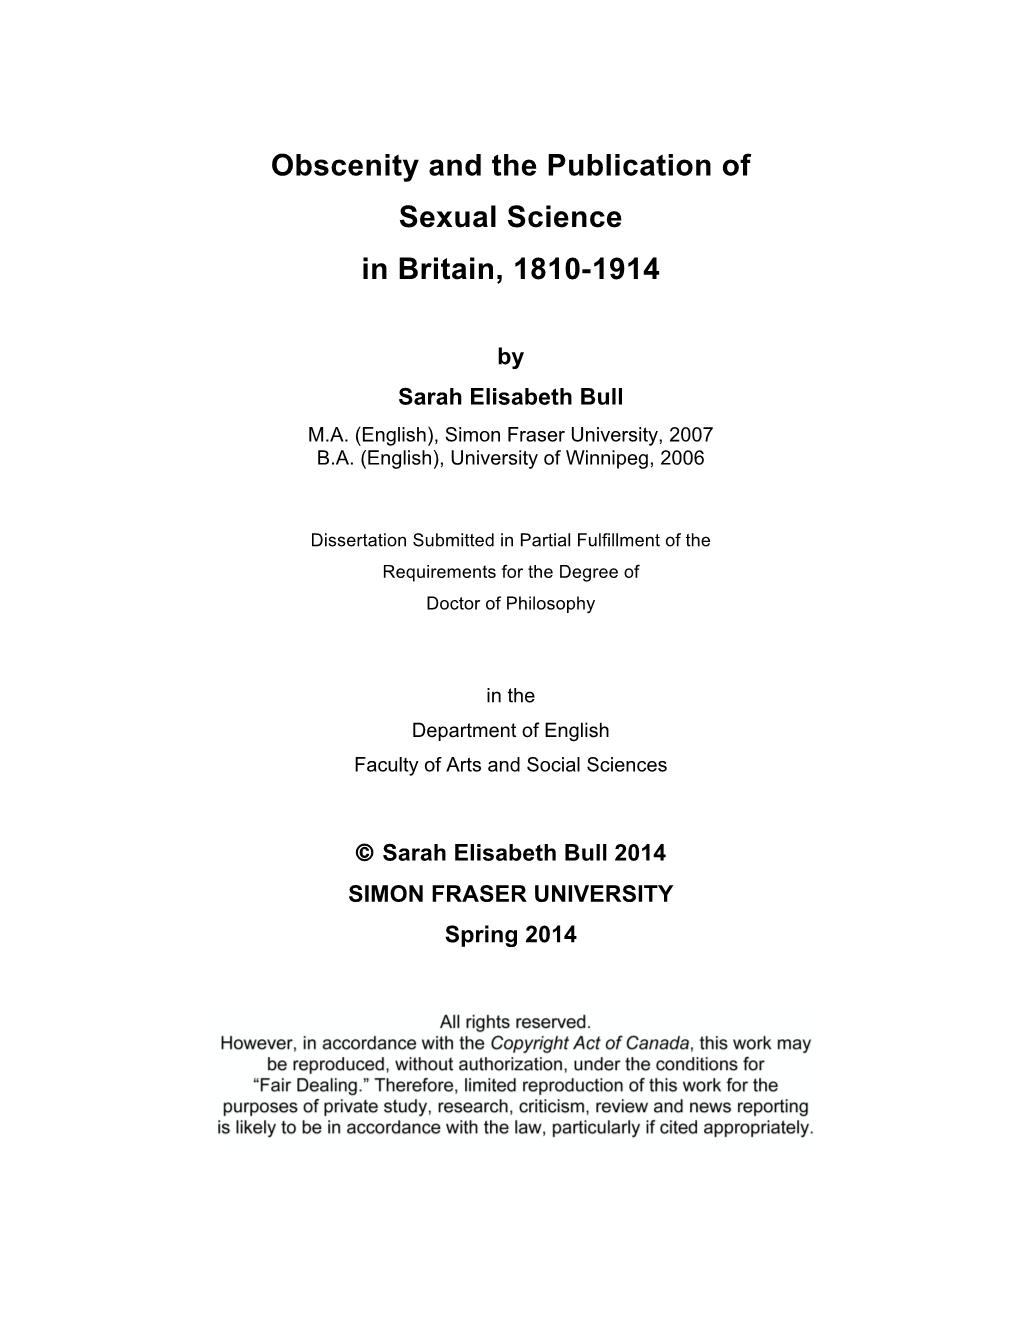 Obscenity and the Publication of Sexual Science in Britain, 1810-1914